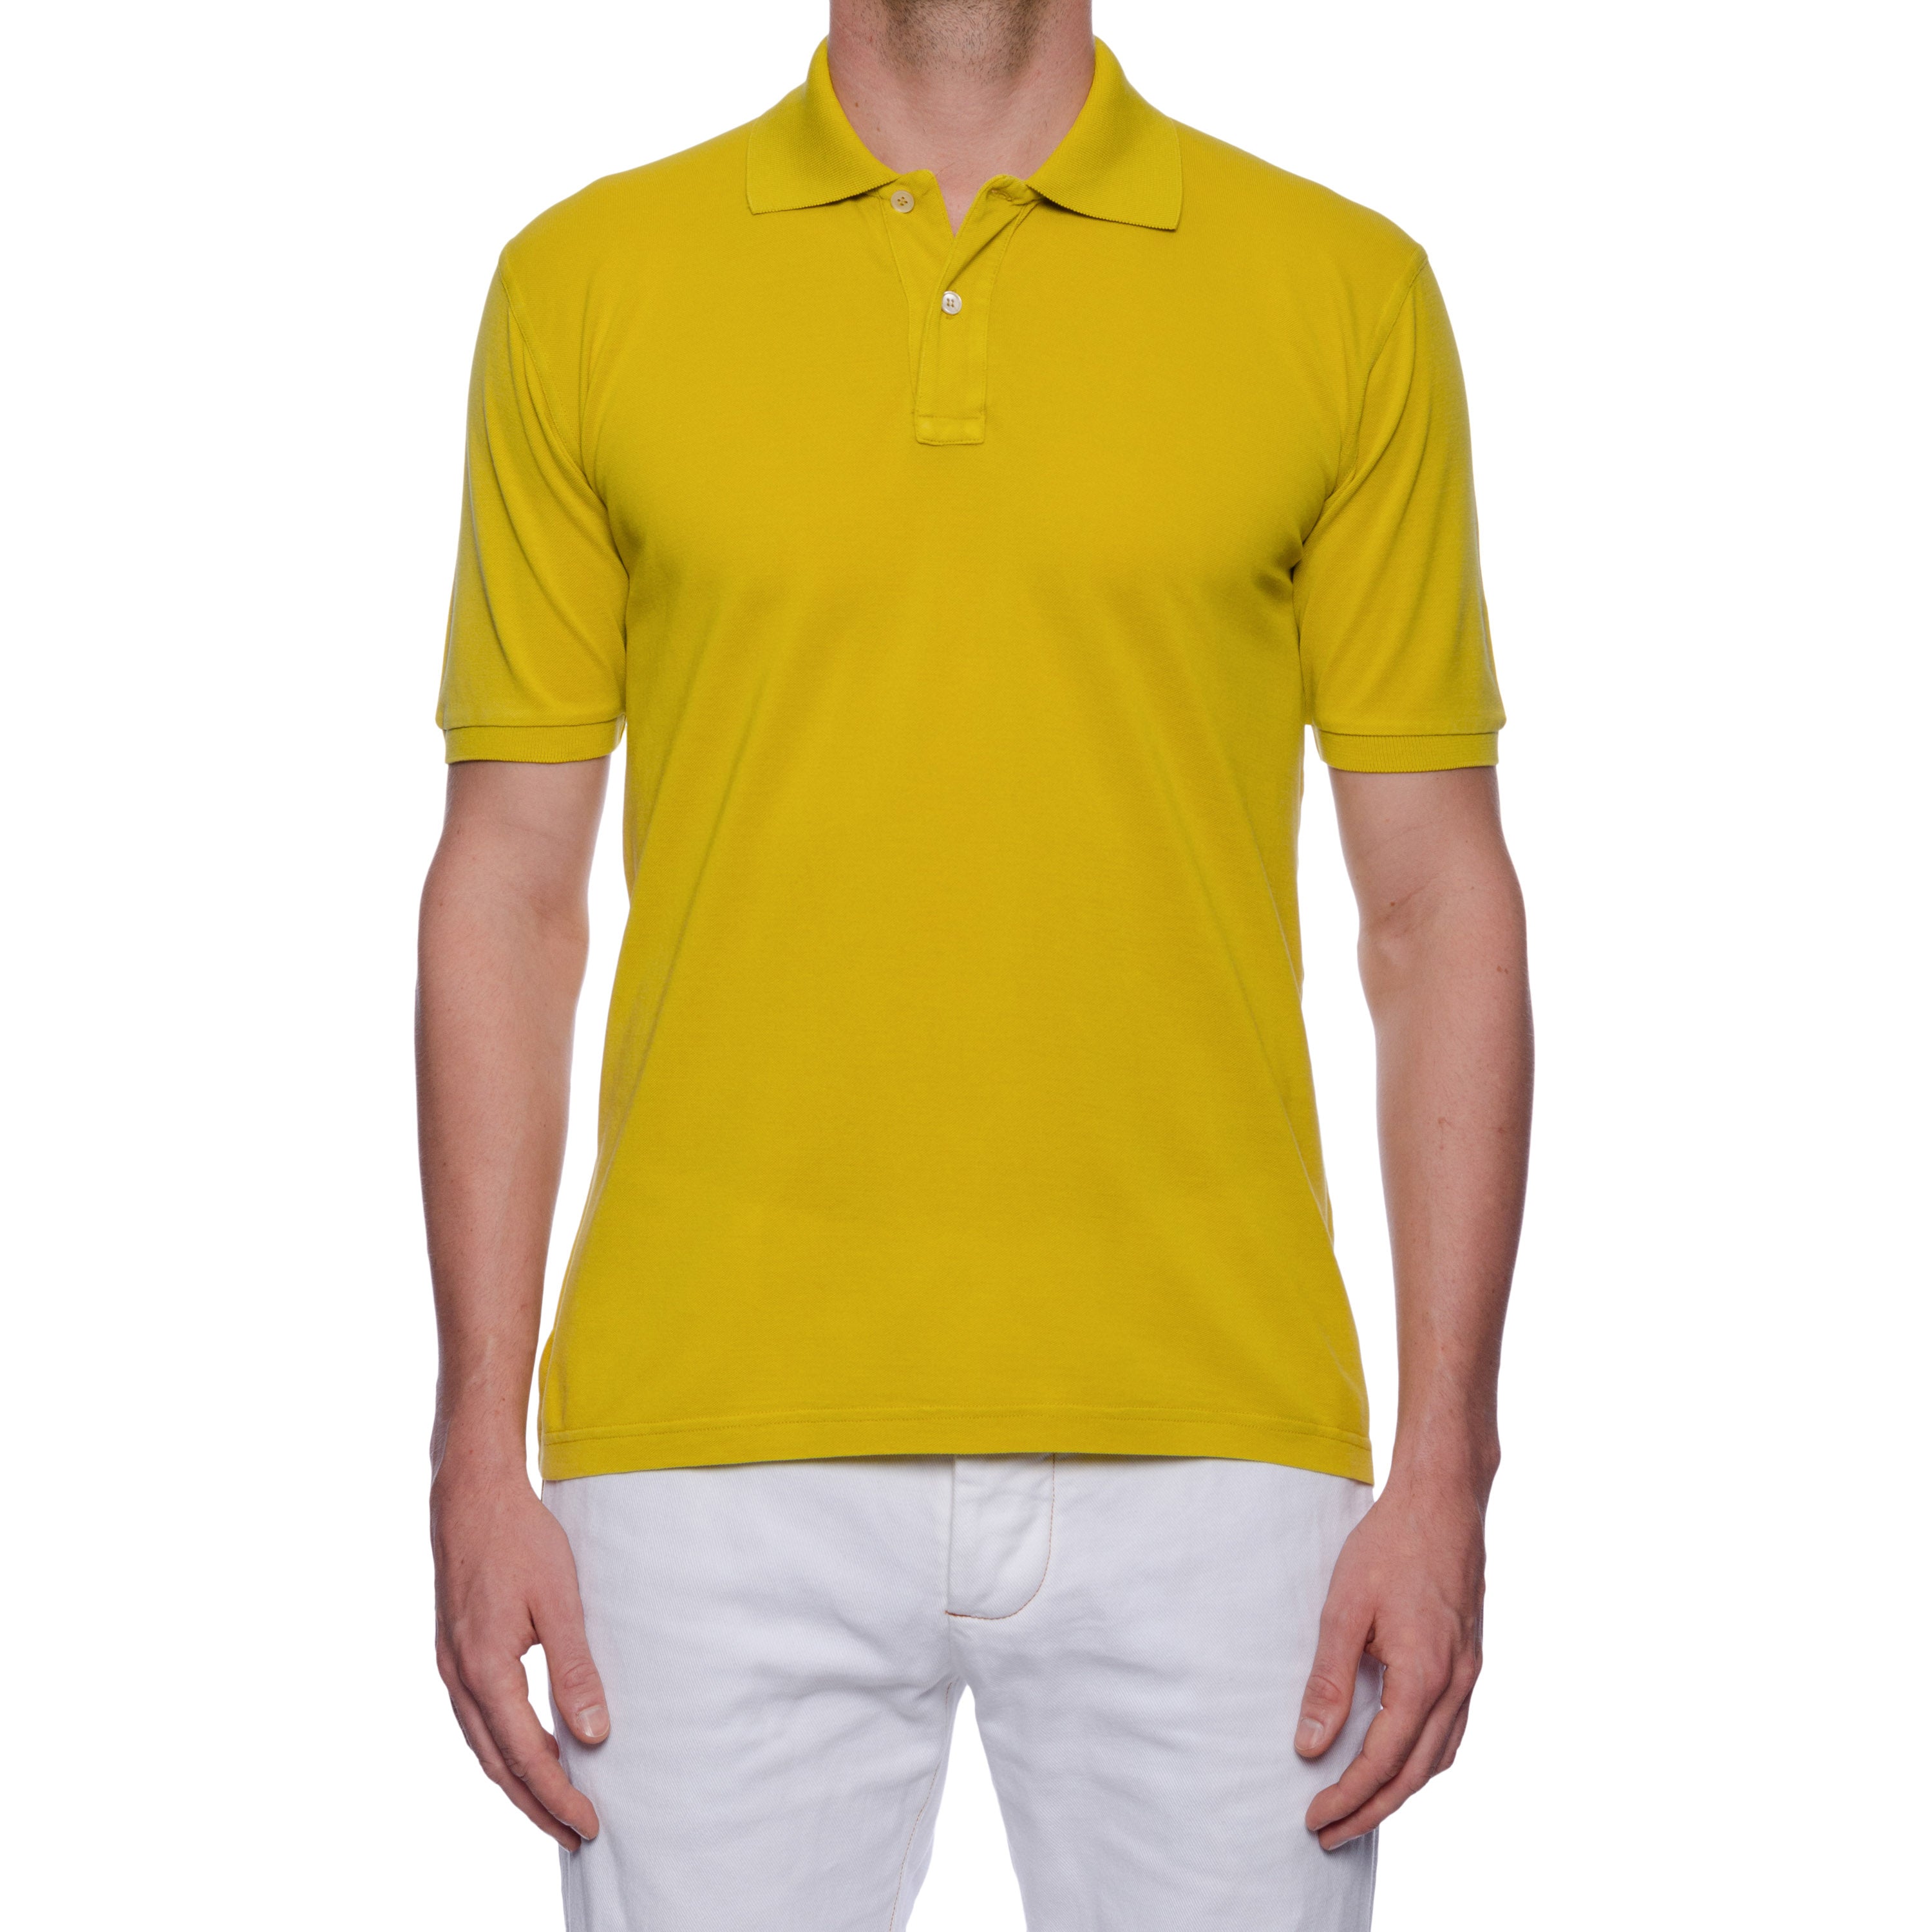 FEDELI 34 LAB "West" Mustard Cotton Pique Frosted Polo Shirt EU 56 NEW US 2XL Slim Fit FEDELI